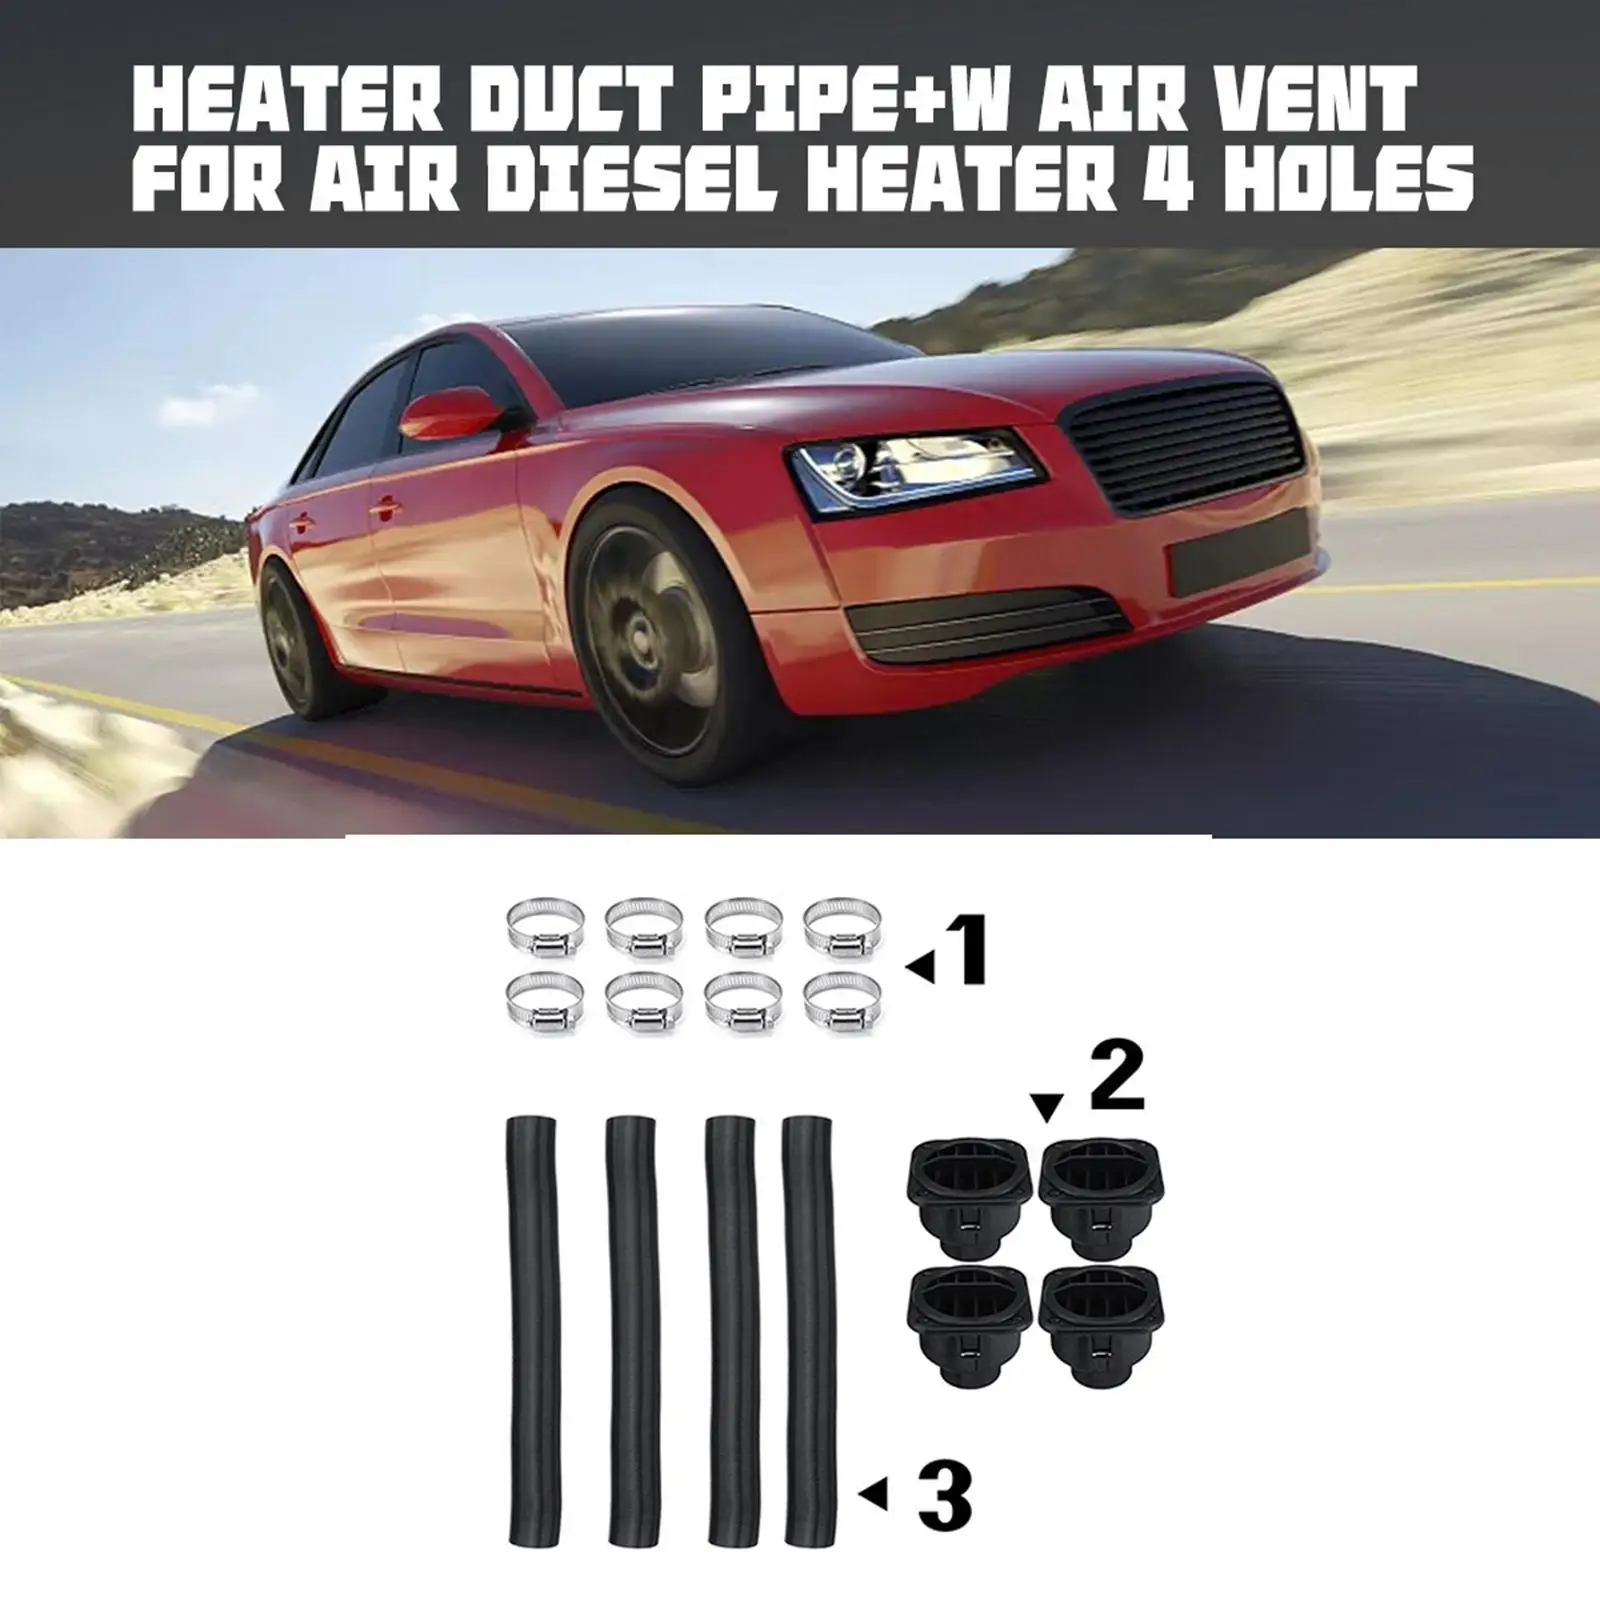 4x 42mm Heater Ducting Pipe Outlet Heater Exhaust Pipe for Air Heater 4 Holes Car